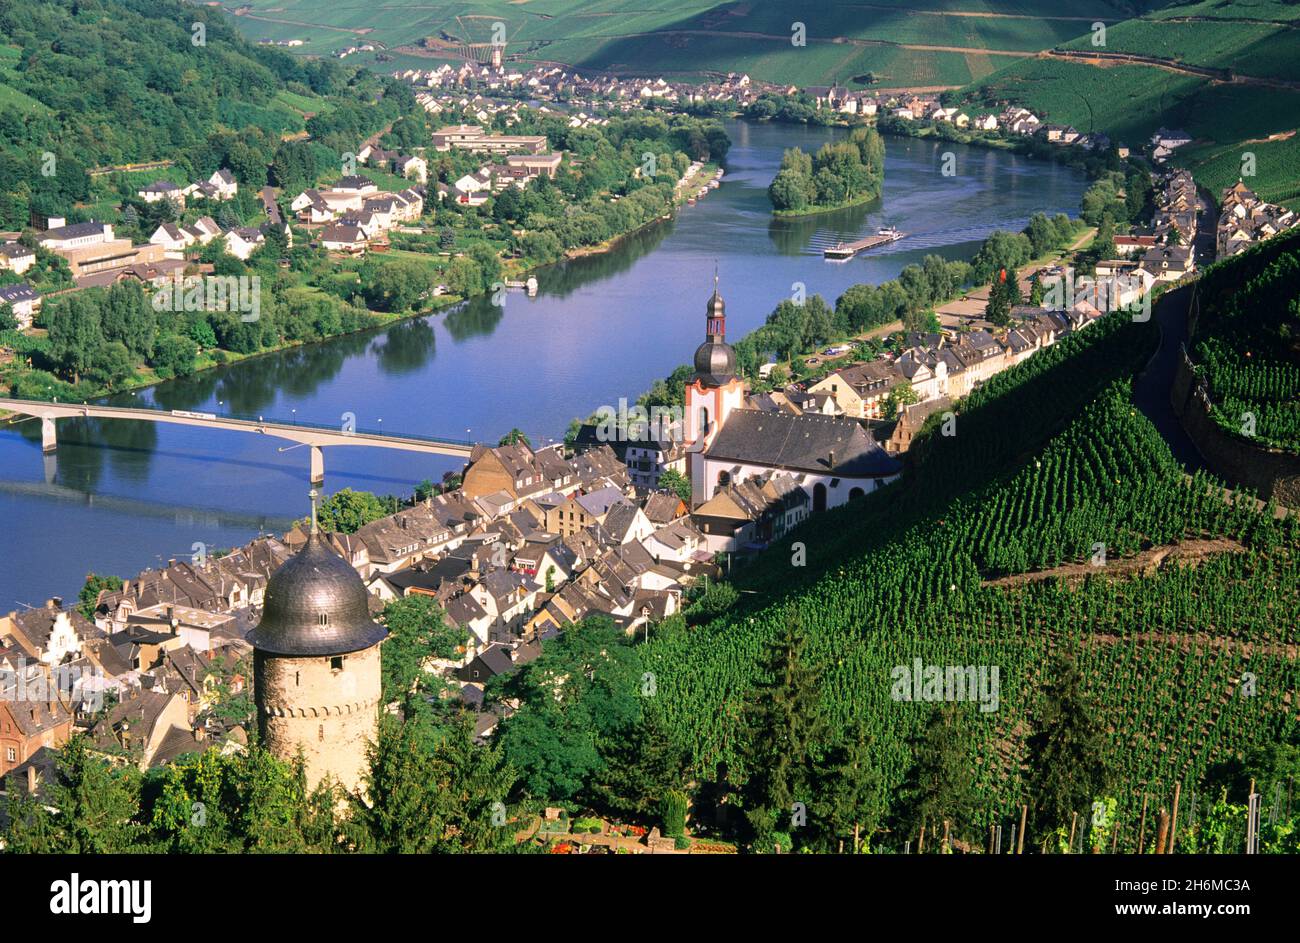 Overview of Zell, the Mosel River, and Vineyards Zell, Germany Stock Photo